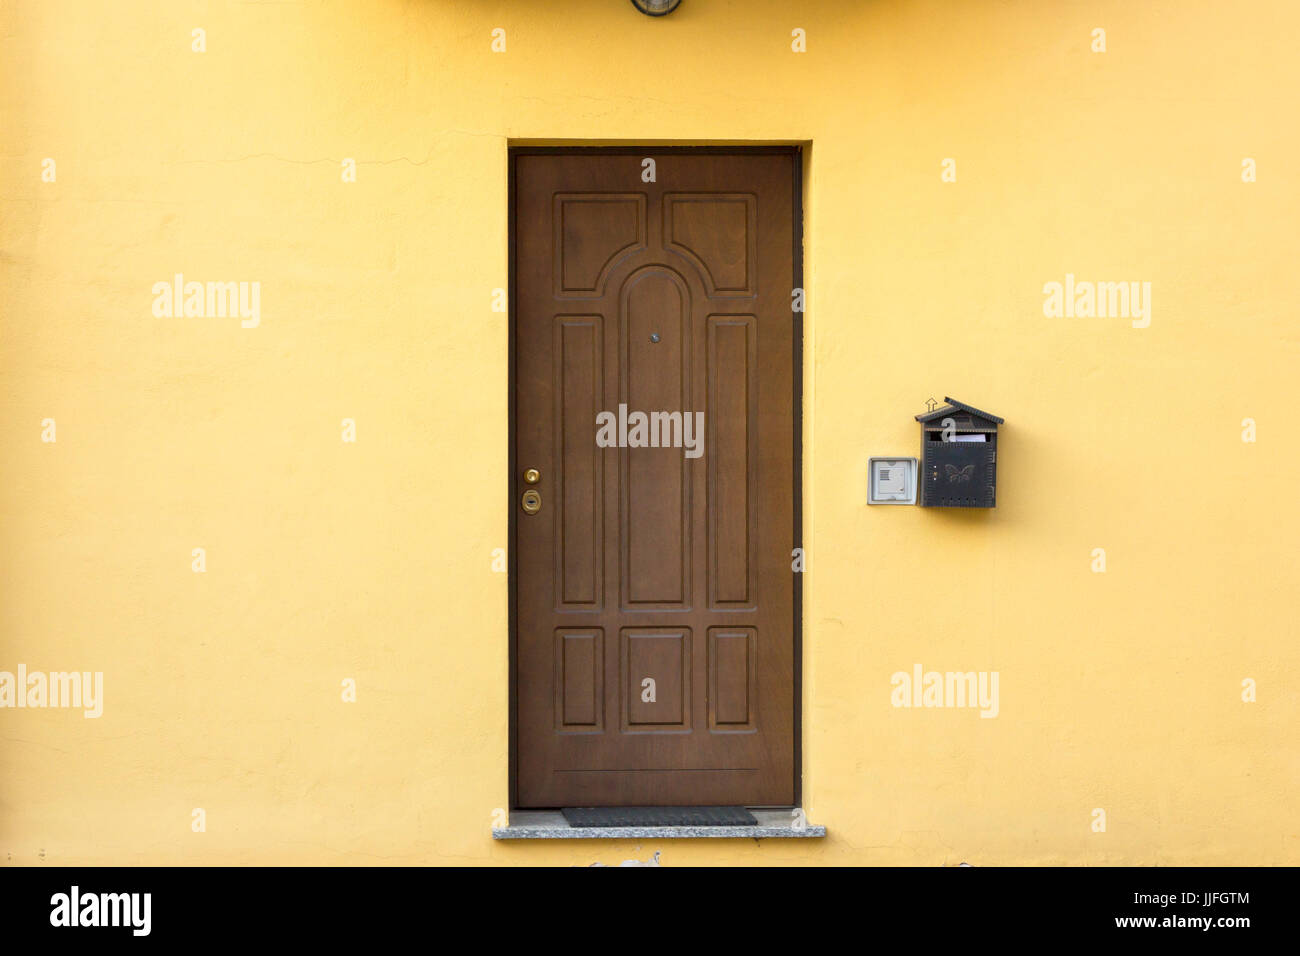 Single wooden entrance door of italian residential home building and yellow wall Stock Photo